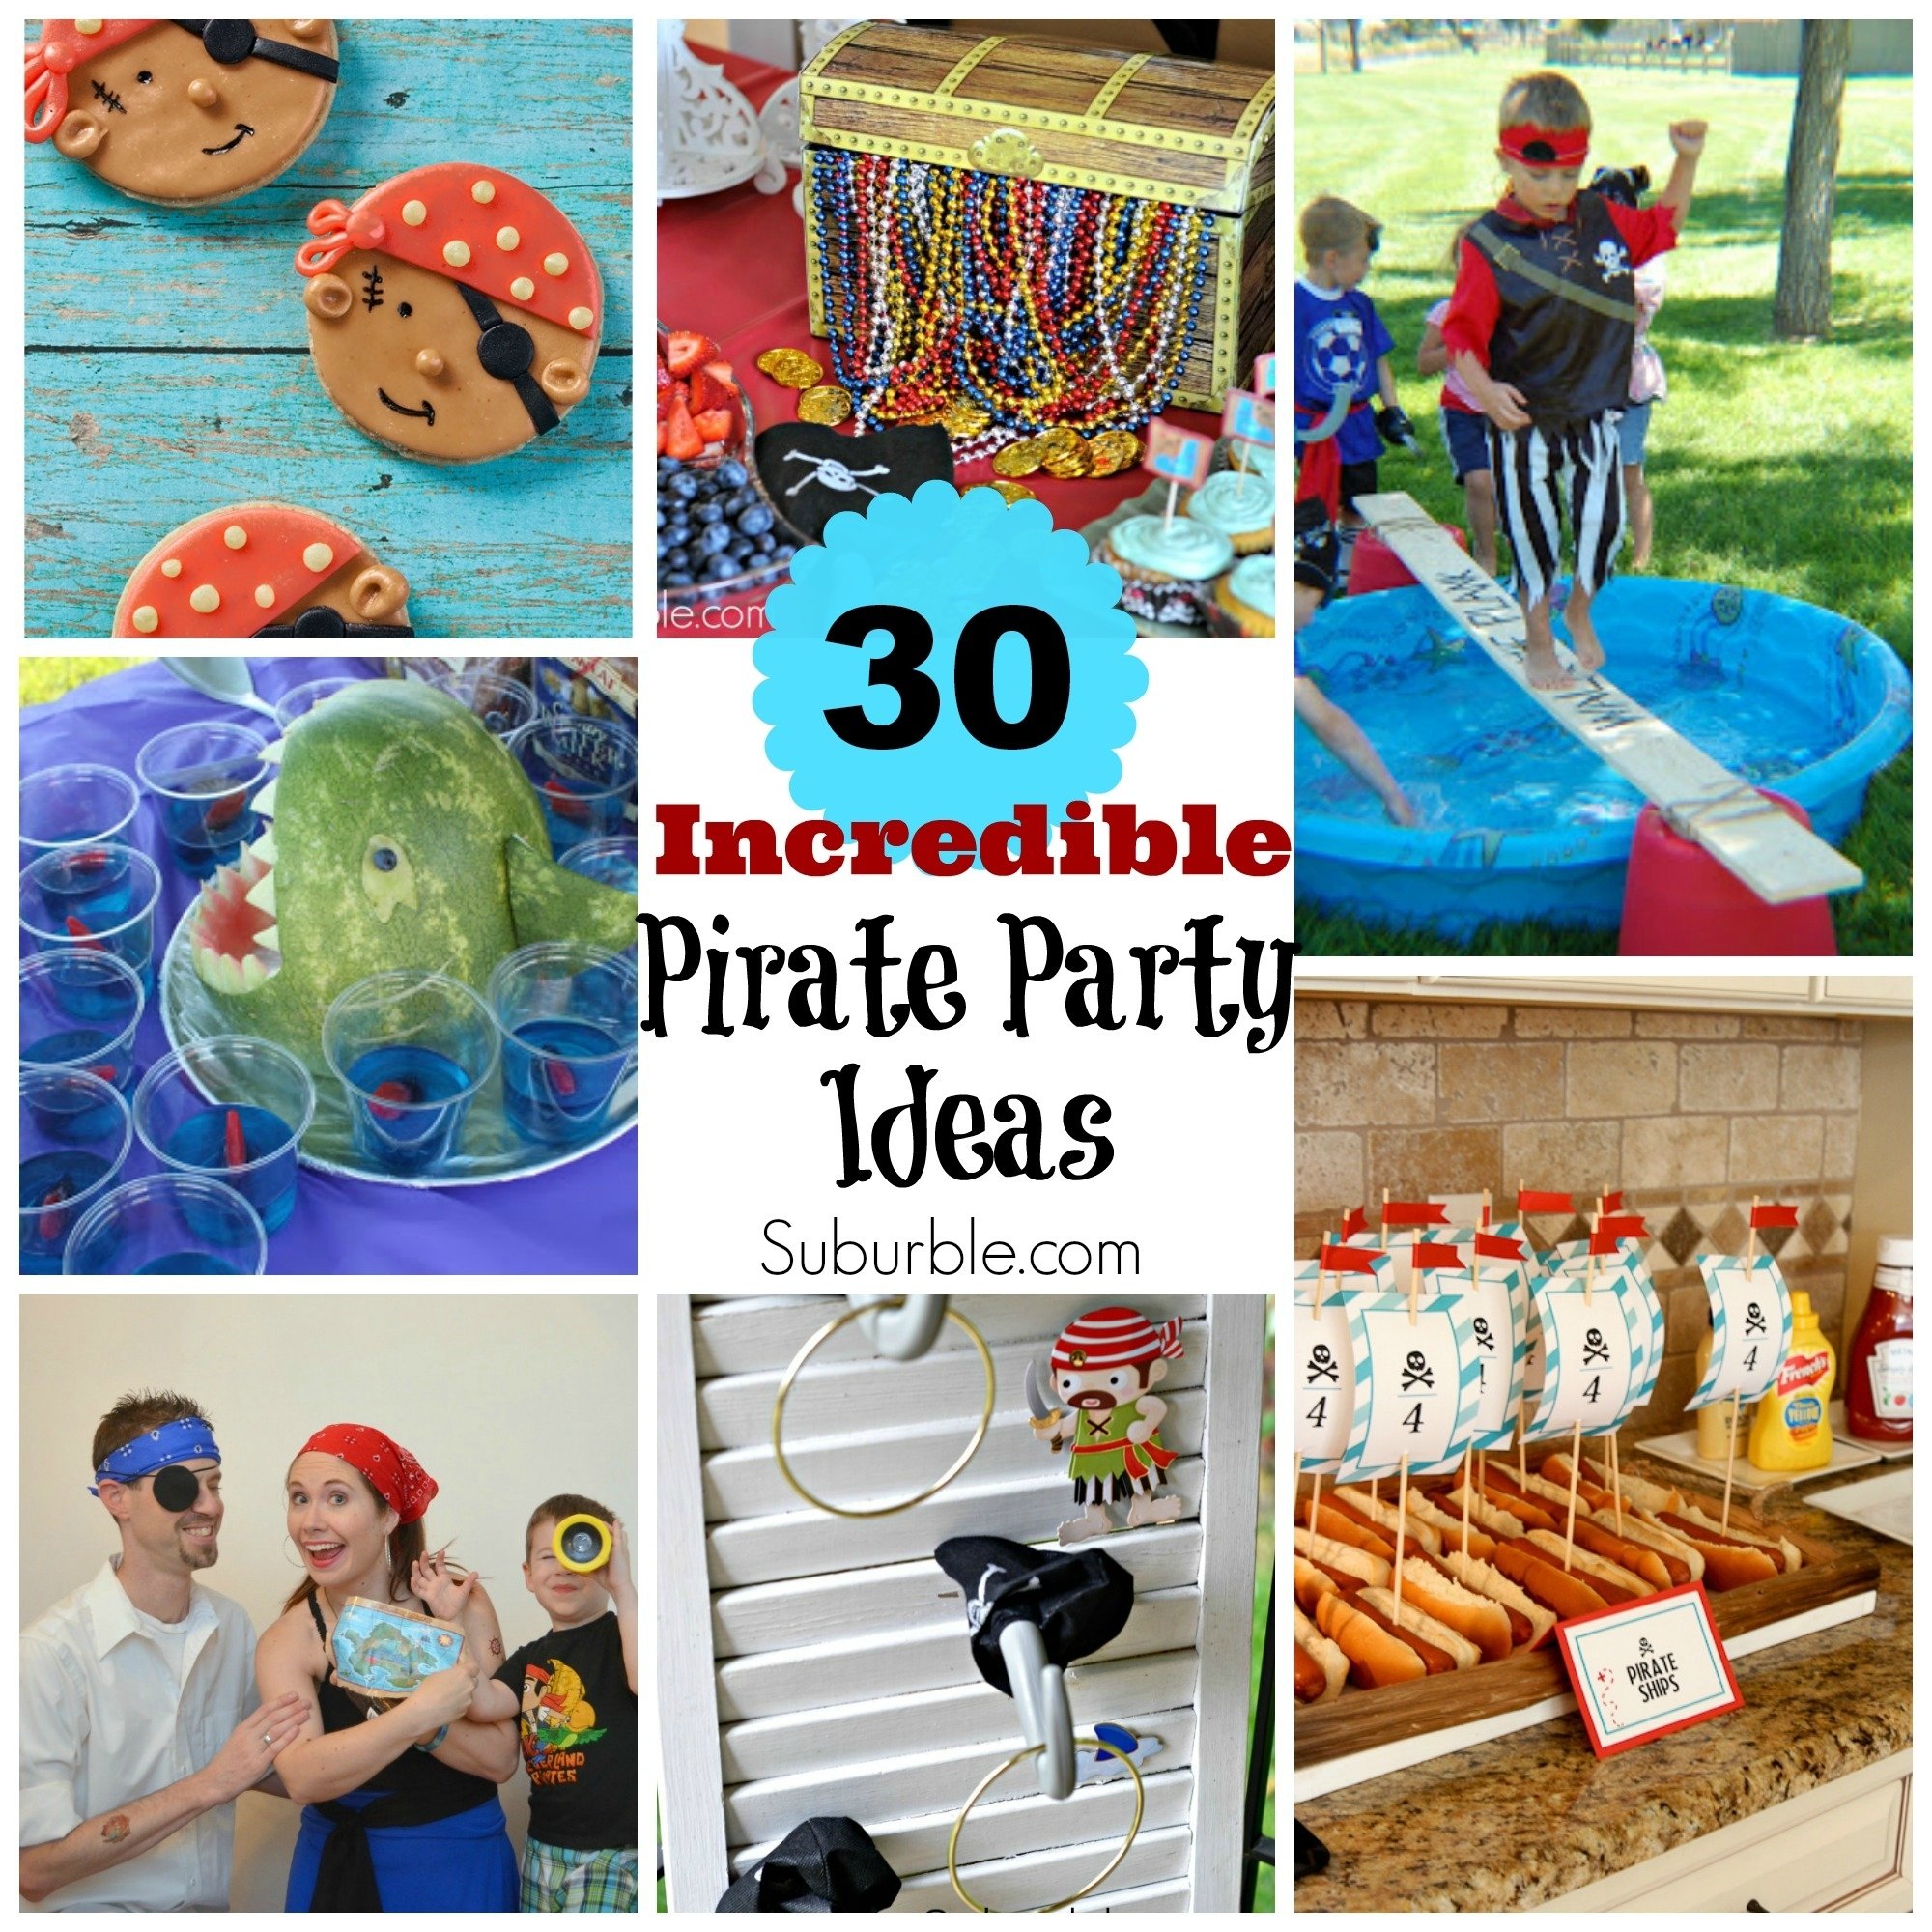 10 Nice Pirate Party Ideas For Kids 30 incredible pirate party ideas suburble 2022